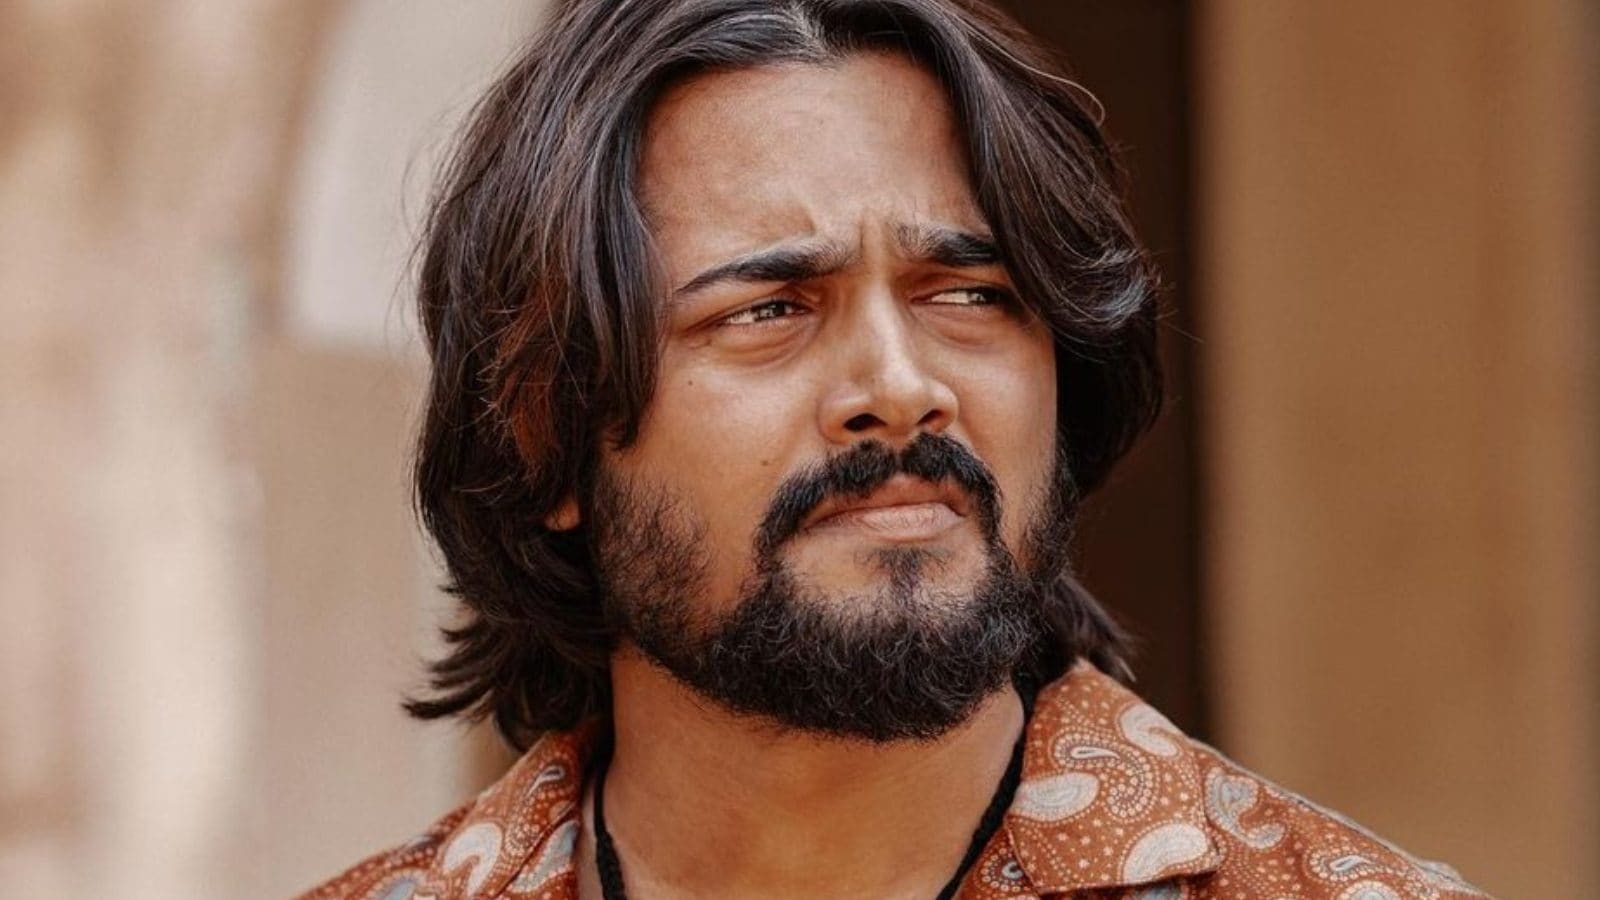 Bhuvan Bam To Voice Takeshi's Castle's Indian Version As Commentator